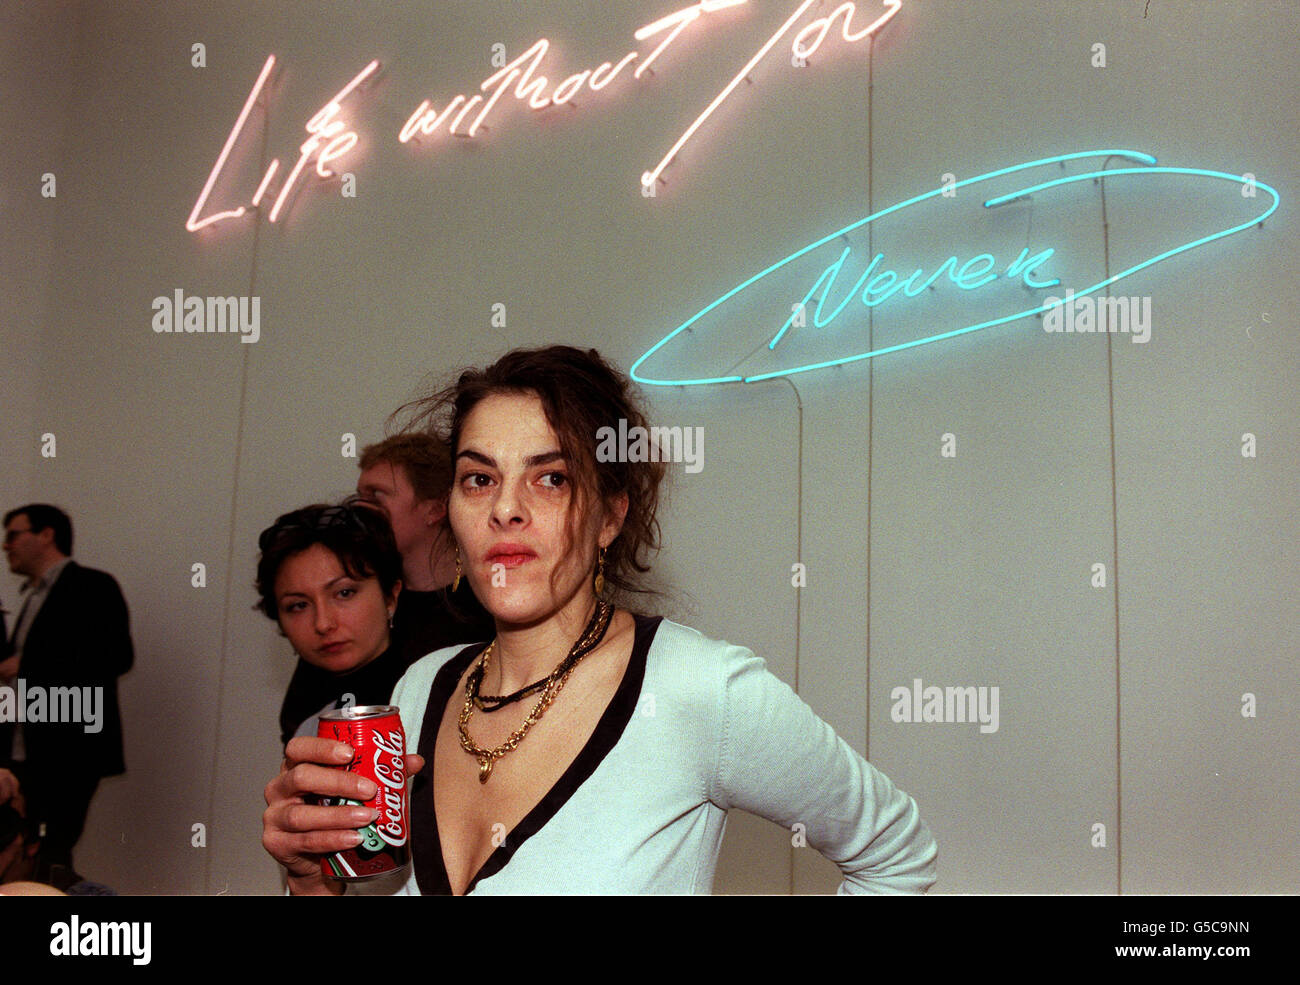 Artist Tracey Emin At The White Cube Gallery In Hoxton Square North London Where She Unveiled Her Latest Exhibition You Forgot To Kiss My Soul Stock Photo Alamy